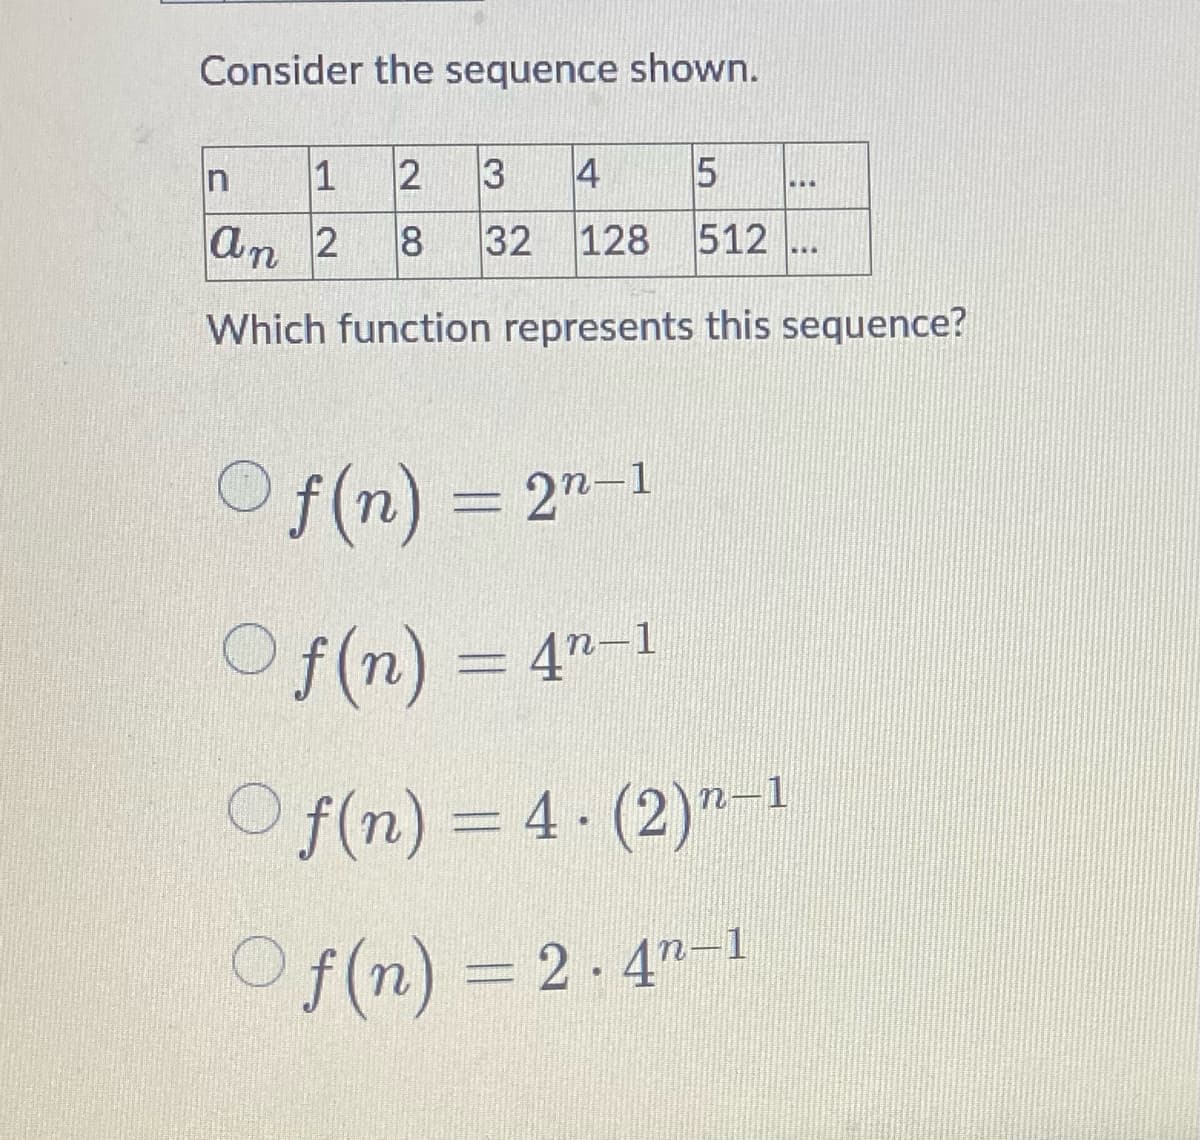 Consider the sequence shown.
n
1
2
3
4
5
an 2
8 32 128 512
Which function represents this sequence?
Of(n) = 2n-1
Of(n) = 4"-1
Of(n) = 4. (2)-1
Of(n) = 2.4-1